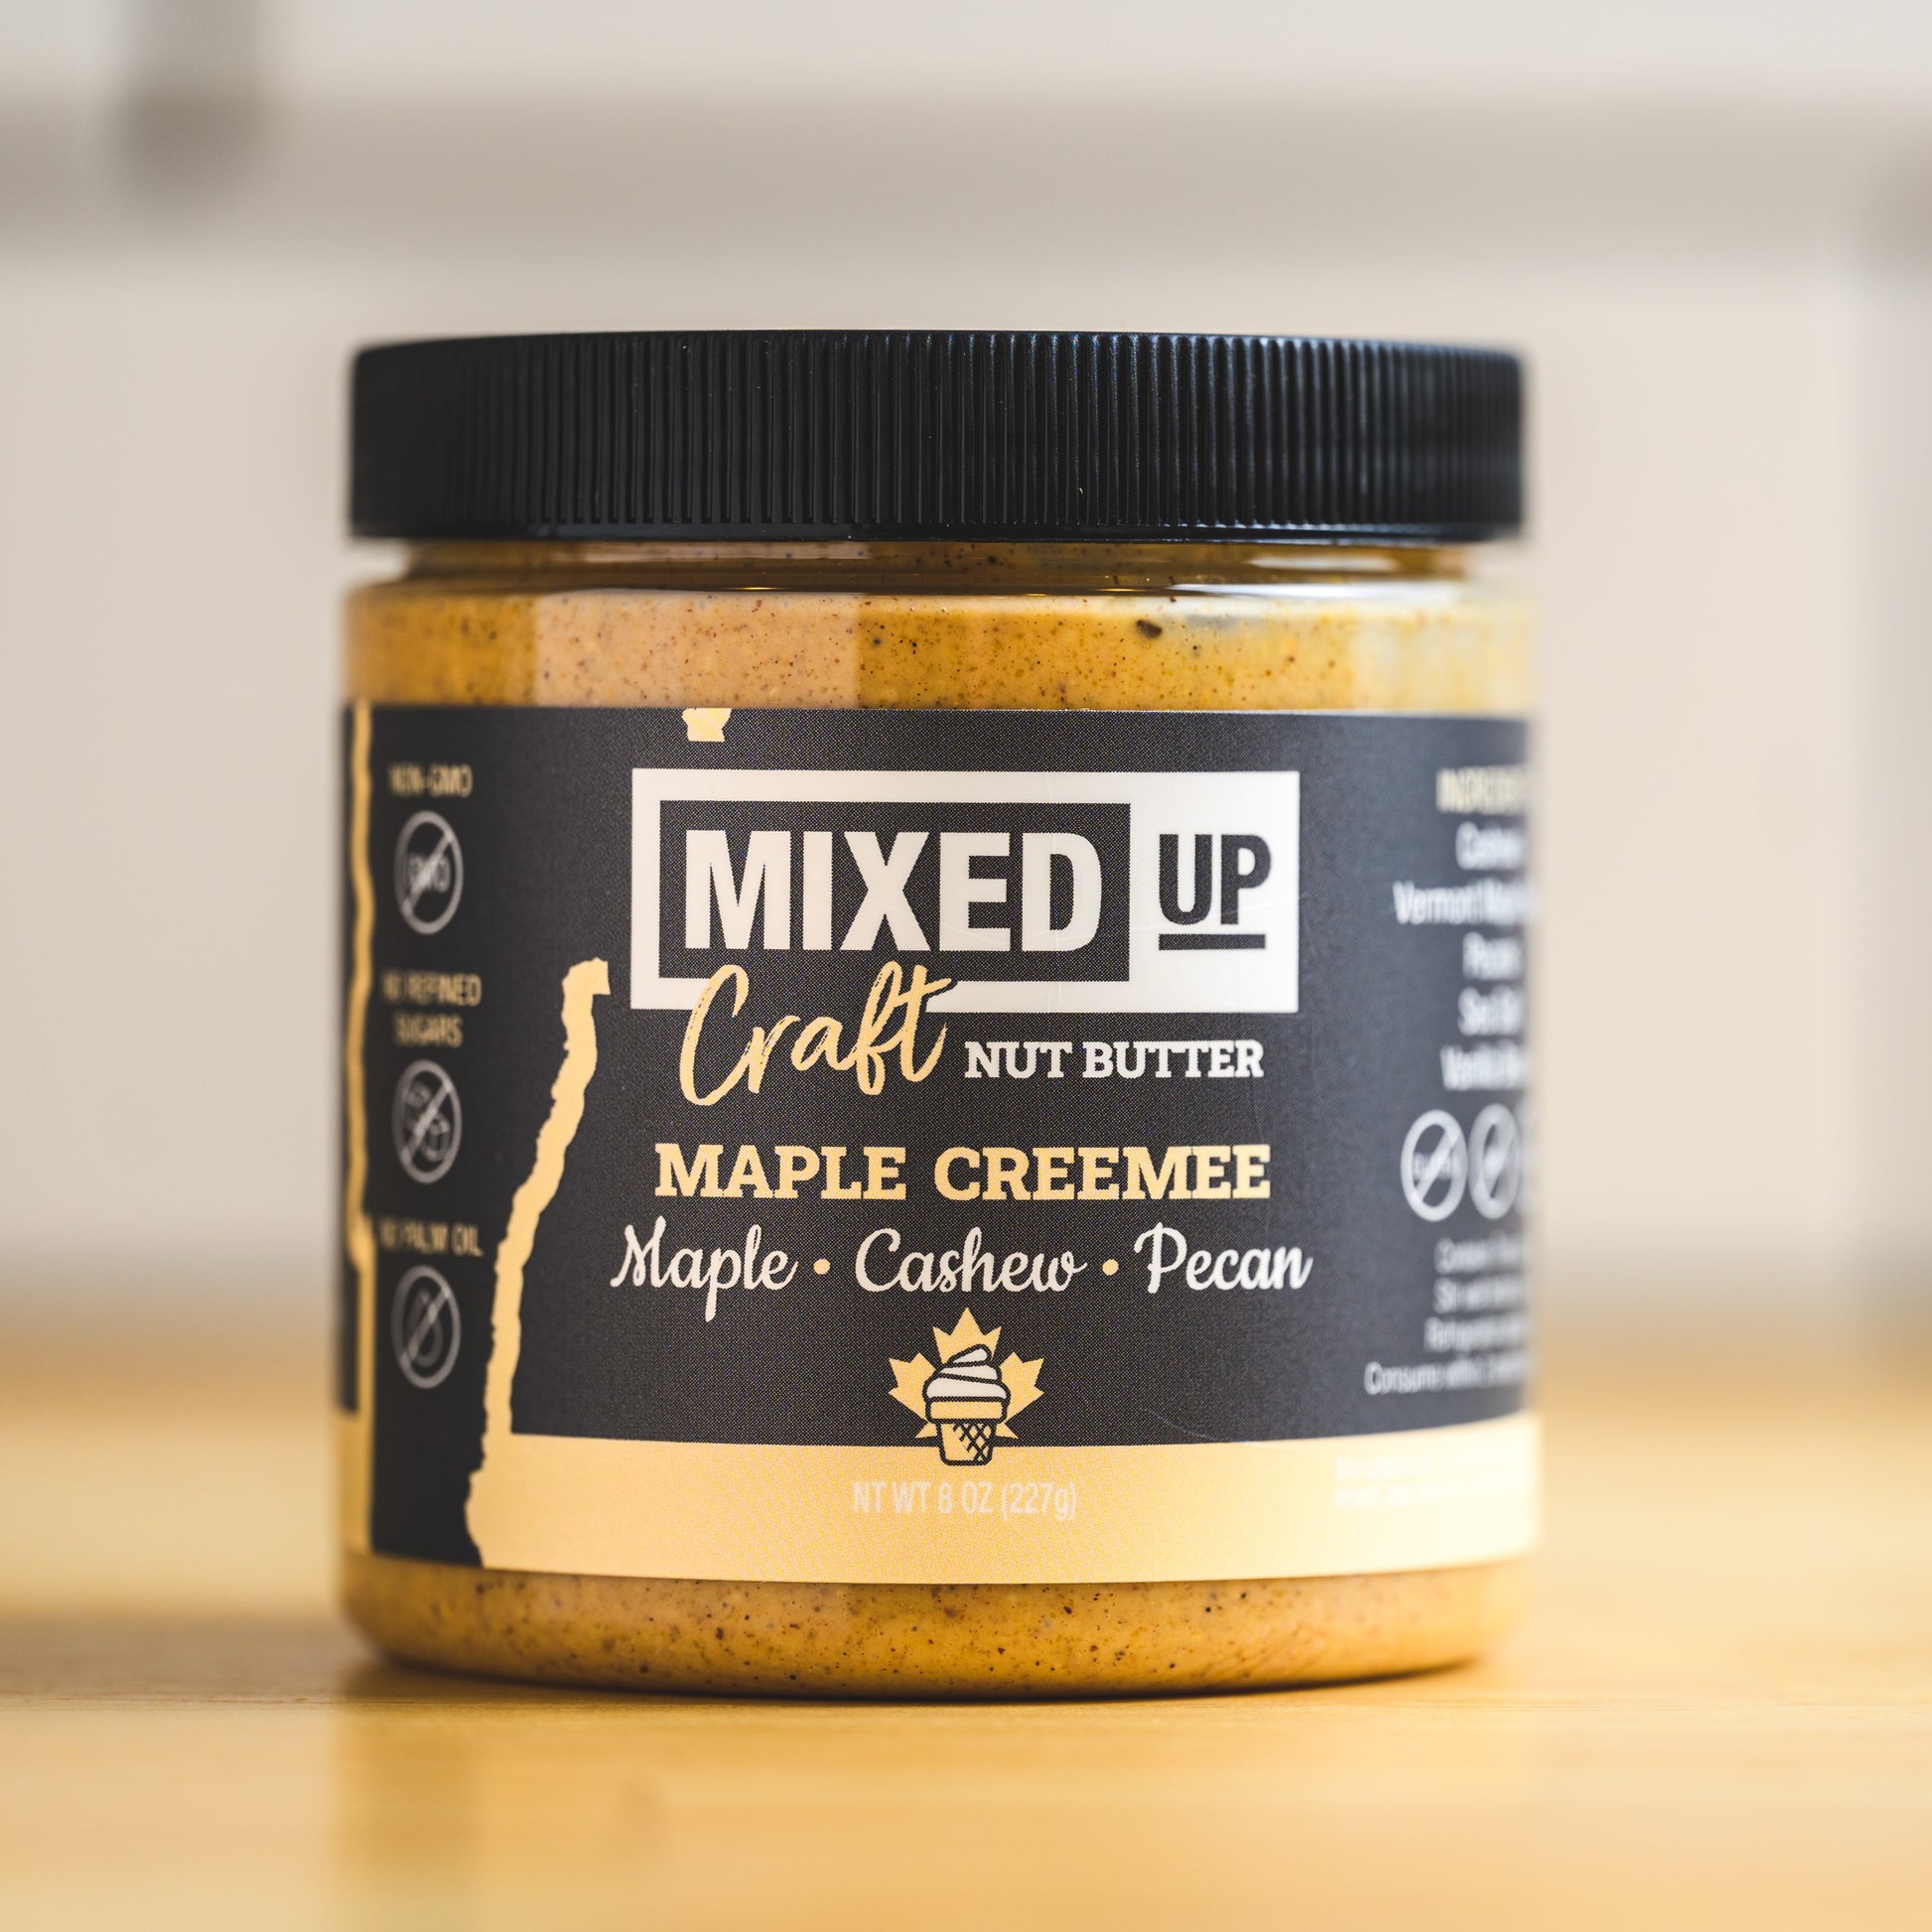 Vermont Maple, Cashew, and Pecan Nut Butter with Vanilla Bean - "Maple Creemee" - 8 oz